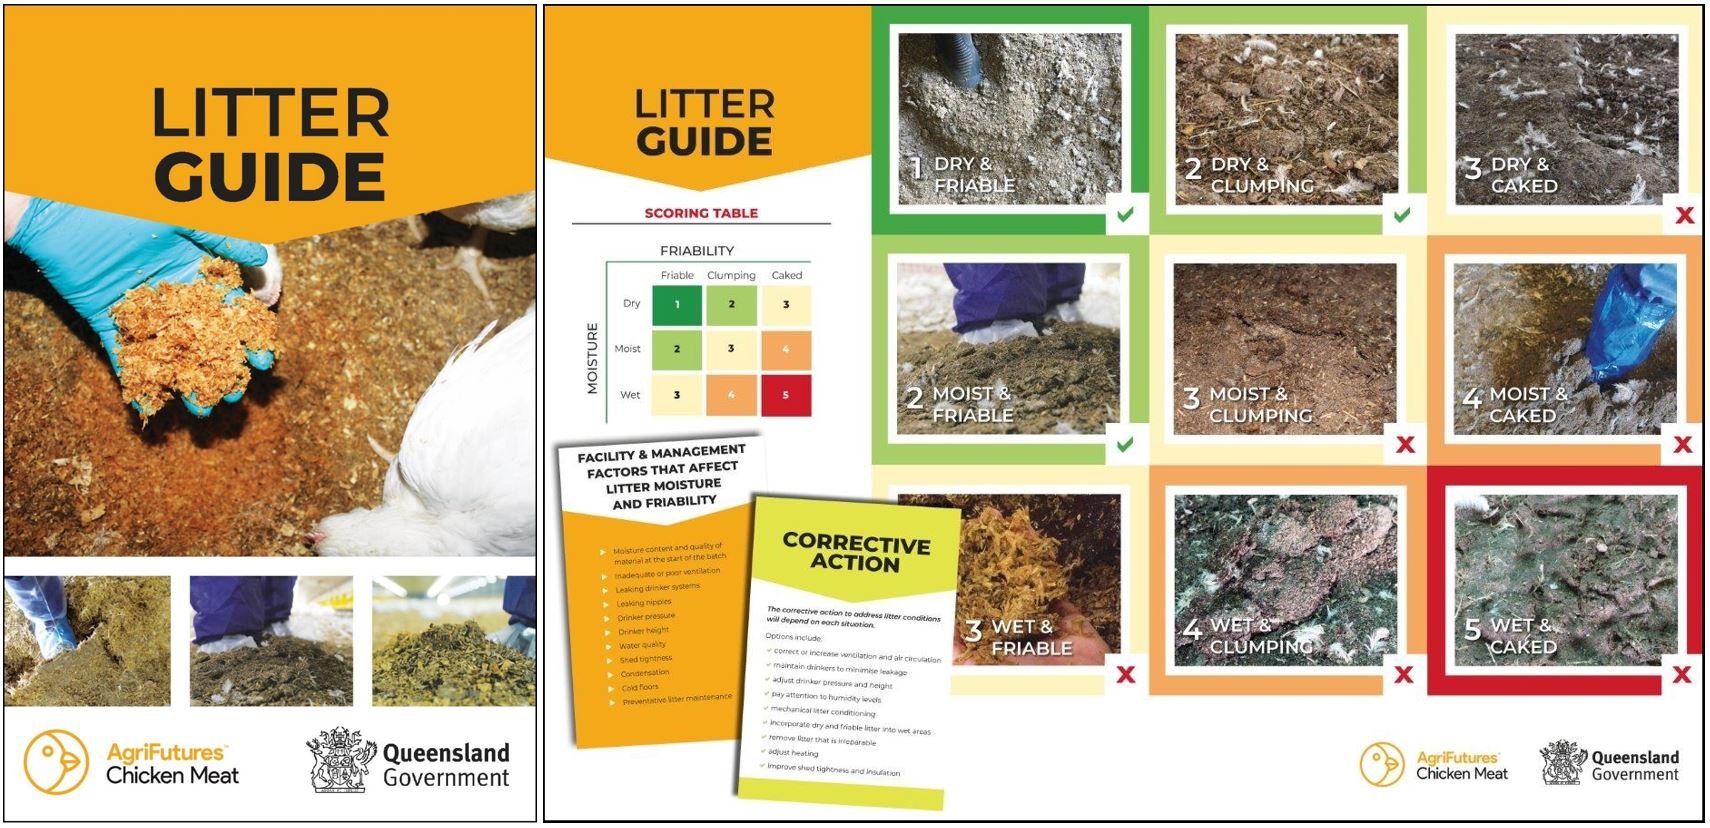 The front cover of the litter guide with a copy of the litter poster beside it.